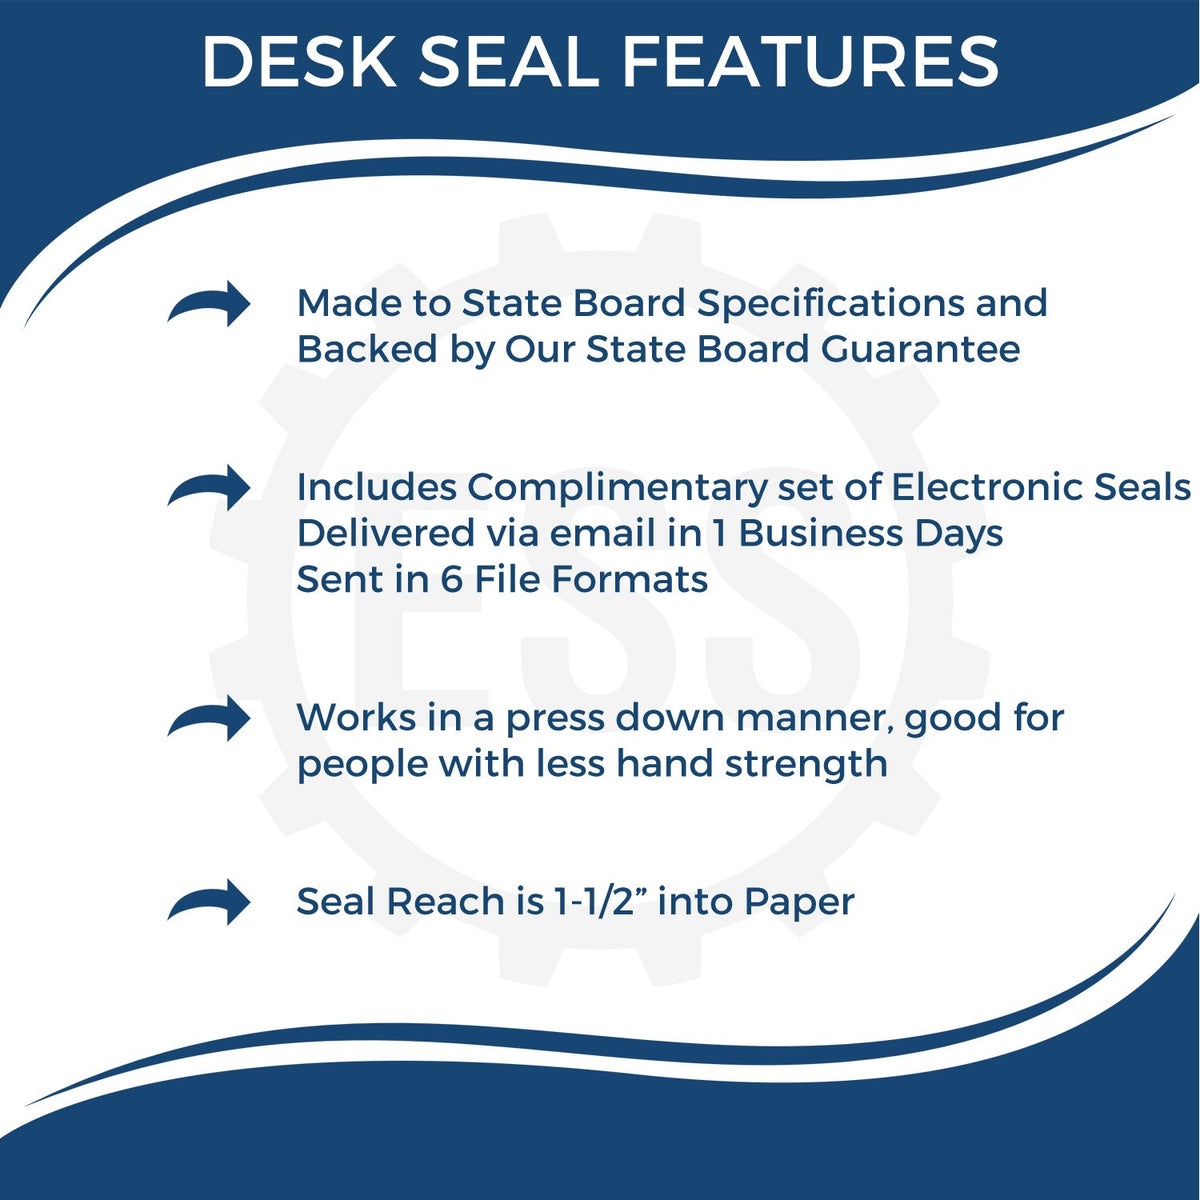 A picture of an infographic highlighting the selling points for the Nevada Desk Surveyor Seal Embosser